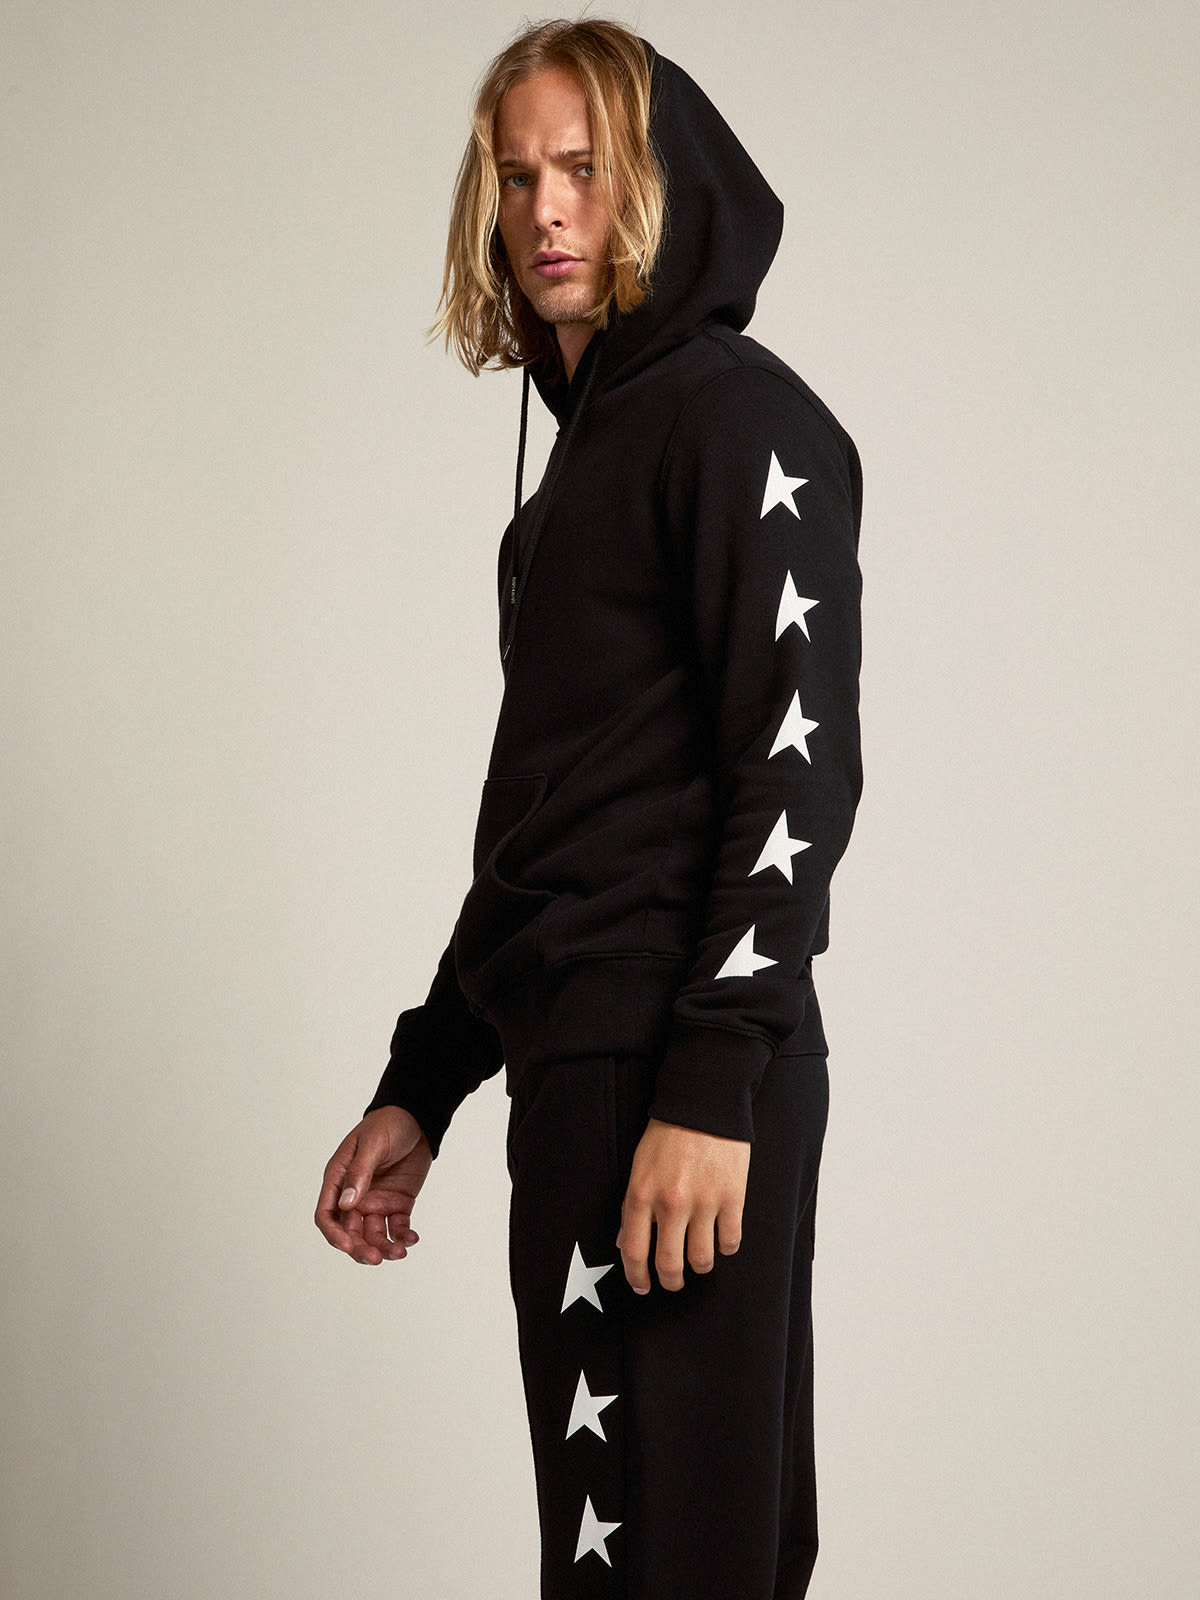 Golden Goose - Black Alighiero Star Collection sweatshirt with contrasting white stars in 